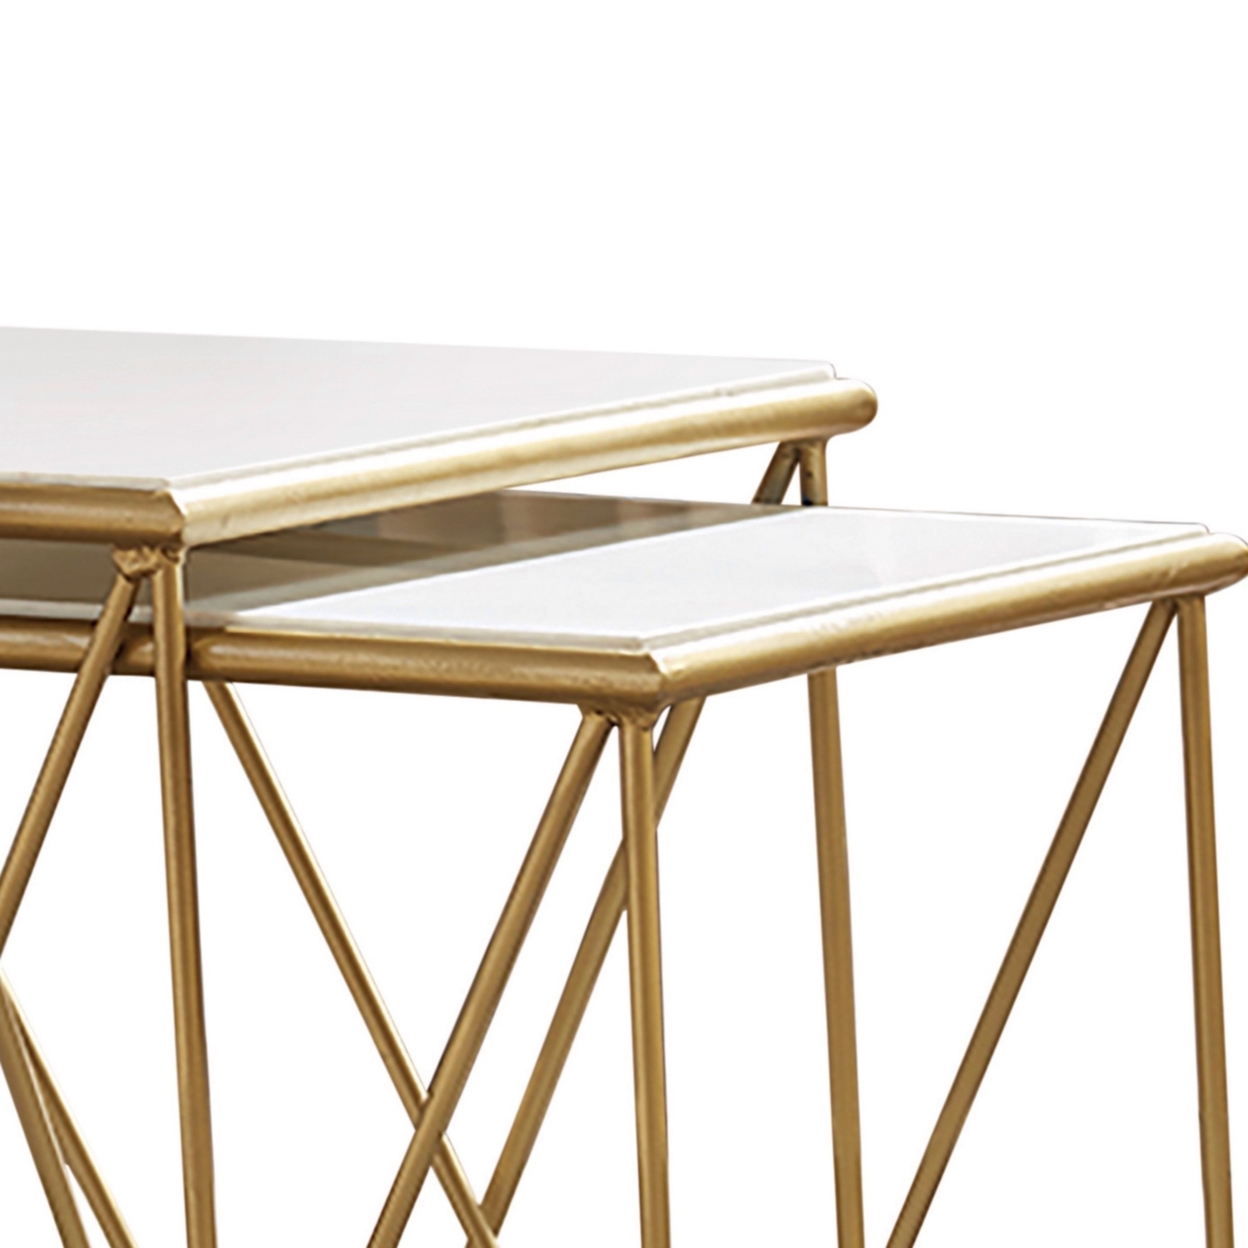 2 Piece Marble Top Nesting Table With Geometric Base, White And Gold- Saltoro Sherpi